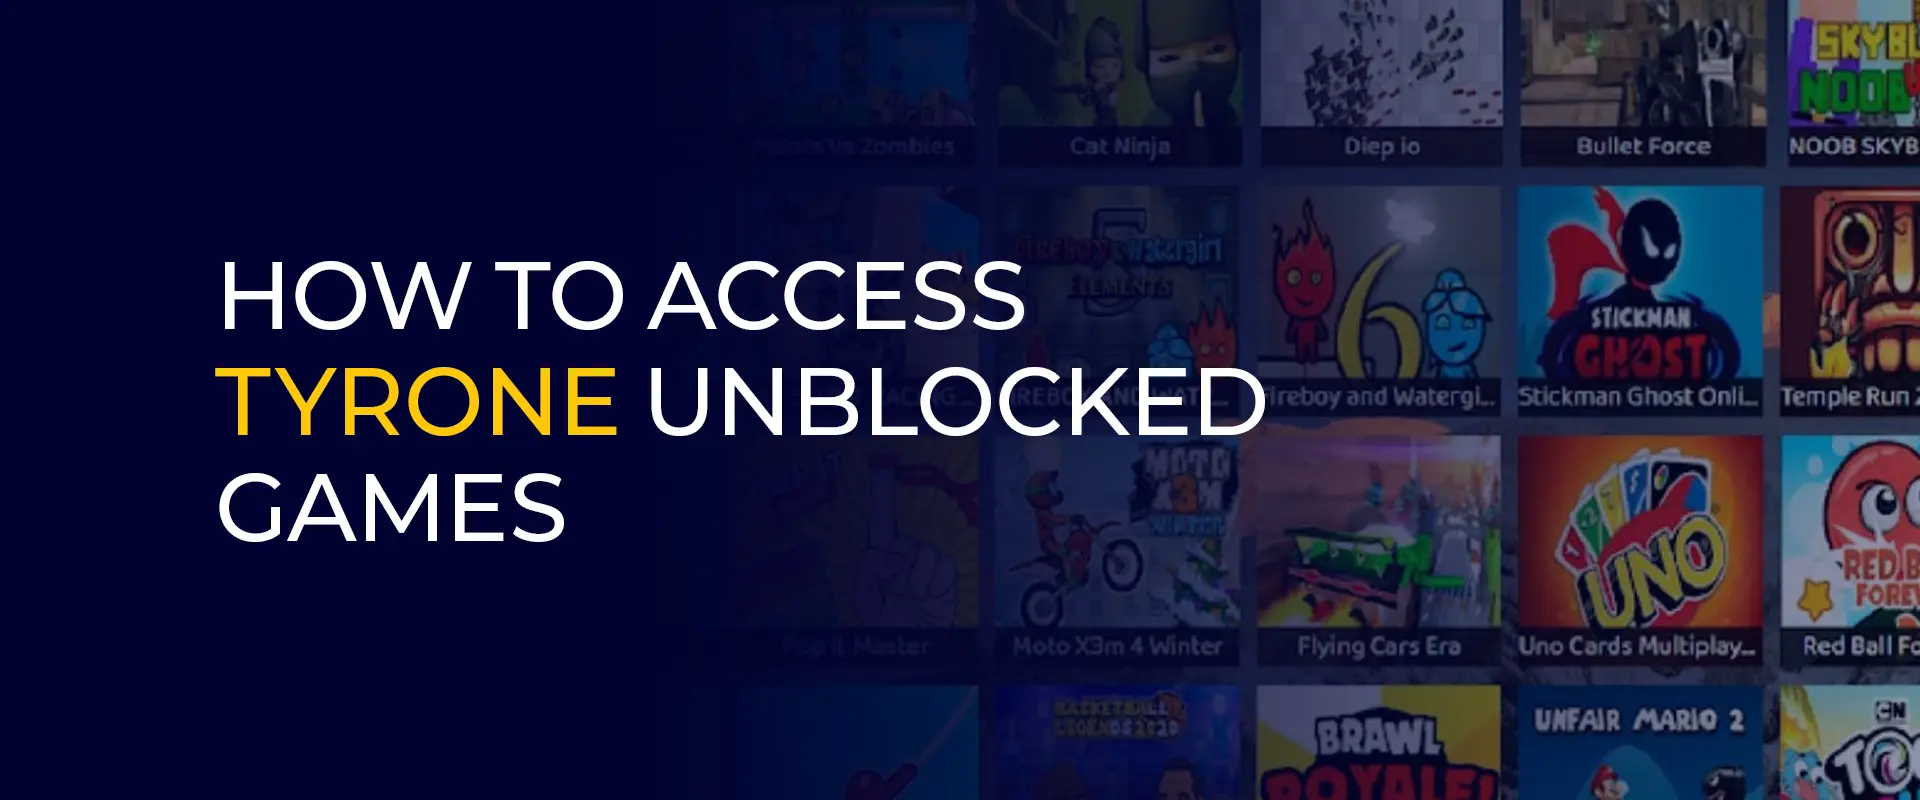 How to Access Tyrone Unblocked Games